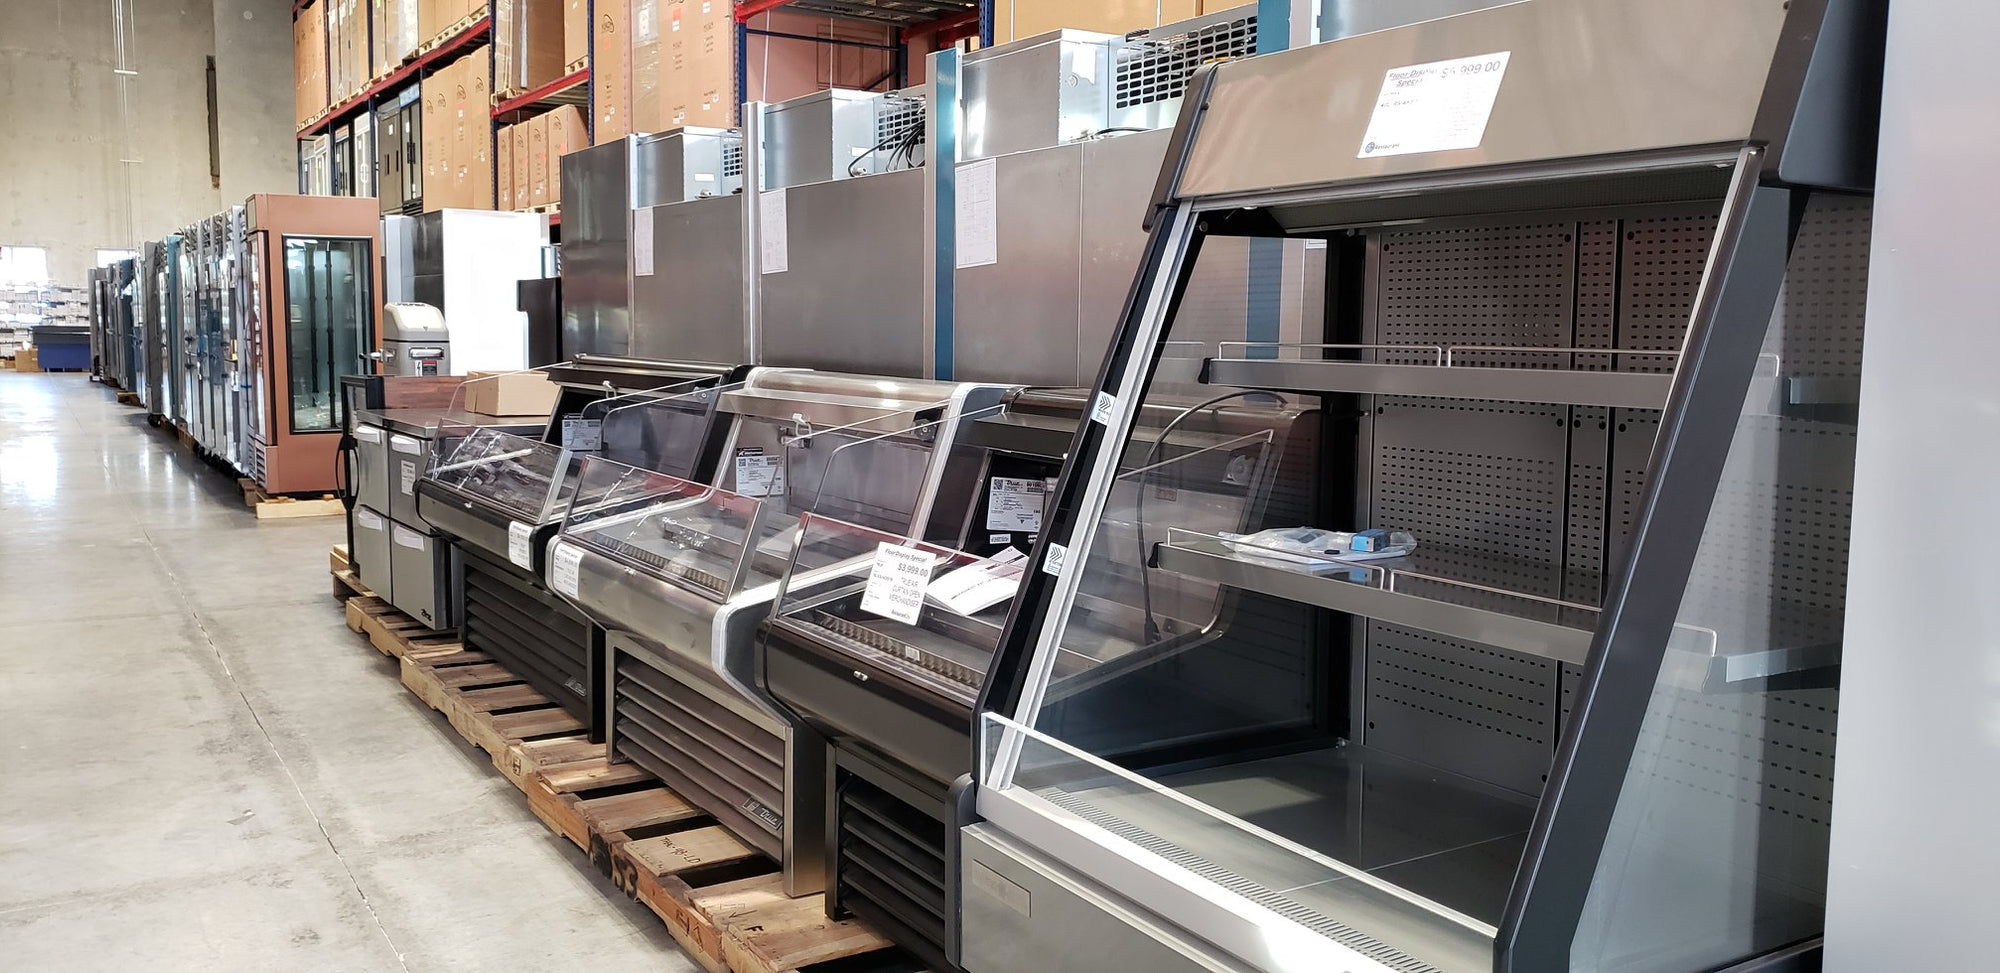 Open Air Merchandisers and Glass Door Merchandisers from True, Yukon, Beverage Air, and more!  All sizes and configurations in stock and priced great!